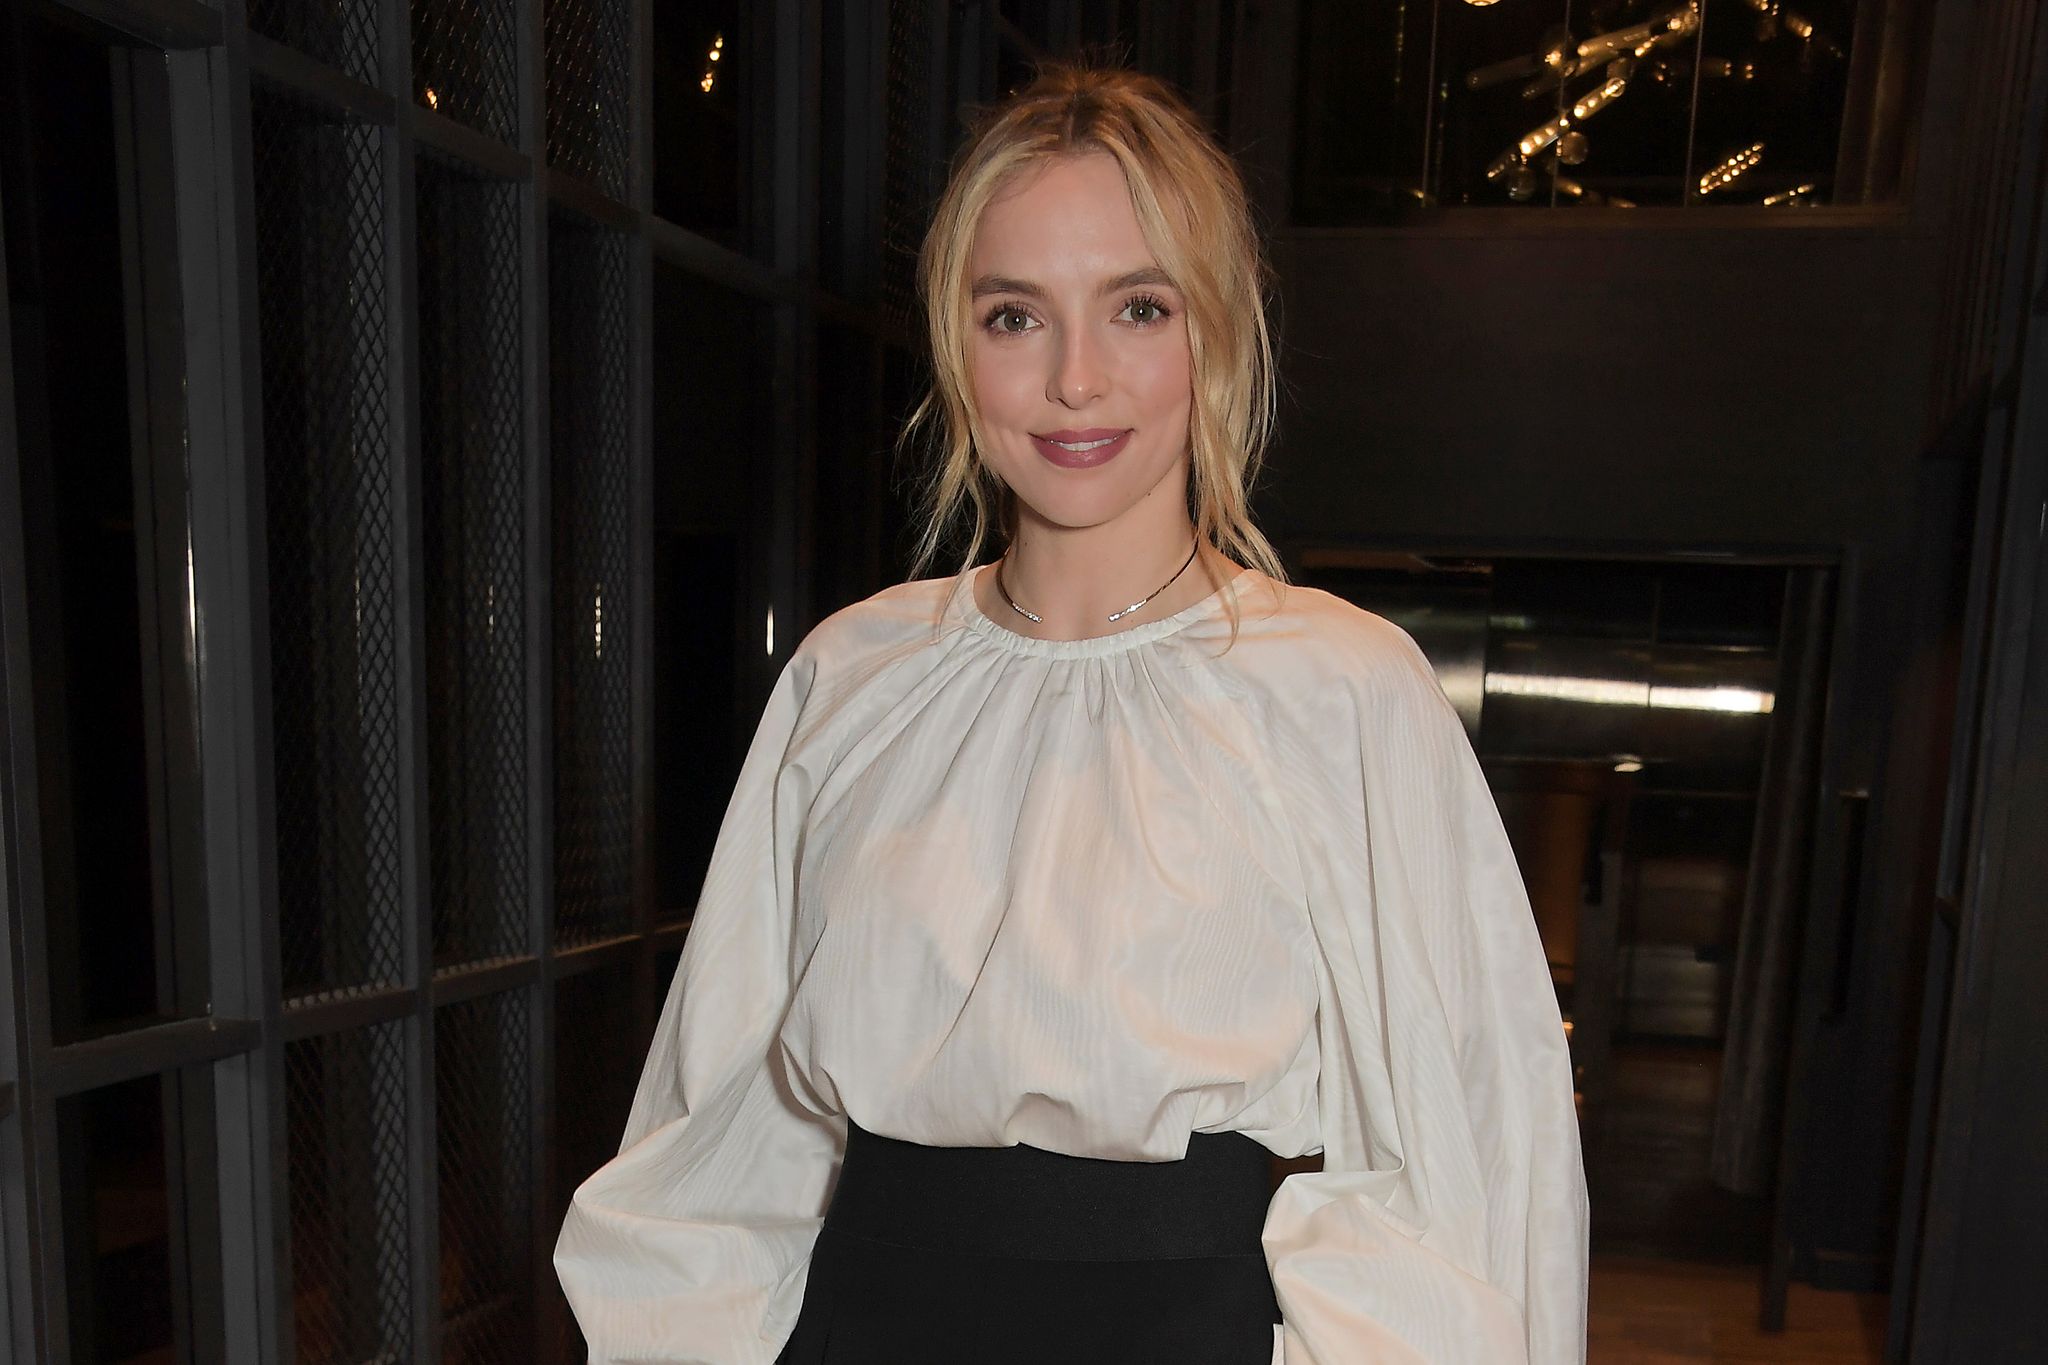 Jodie Comer during the after party for "Prima Facie" at The Londoner Hotel on April 27, 2022, in London, England. | Source: Getty Images